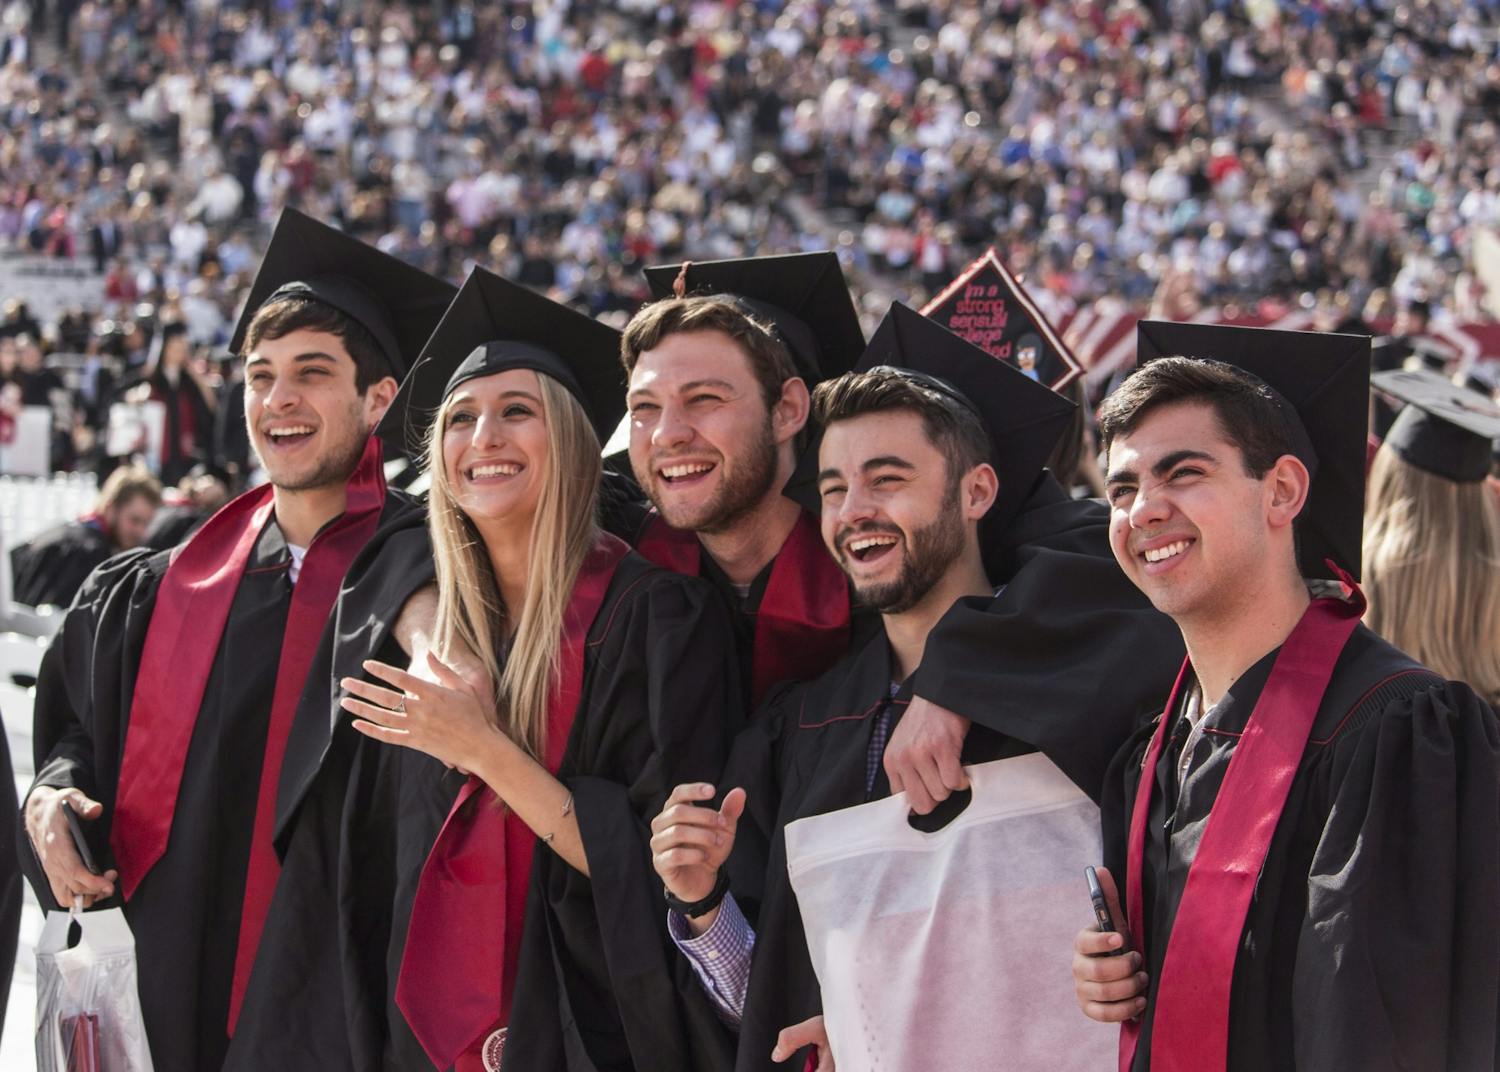 Members of the graduating class of 2018 pose for a group picture before the start of the undergraduate commencement May 5, 2018, in Memorial Stadium. IU announced Tuesday the winter 2020 commencement ceremony will be conducted virtually, but spring 2021 is planned to happen inperson at Memorial Stadium.